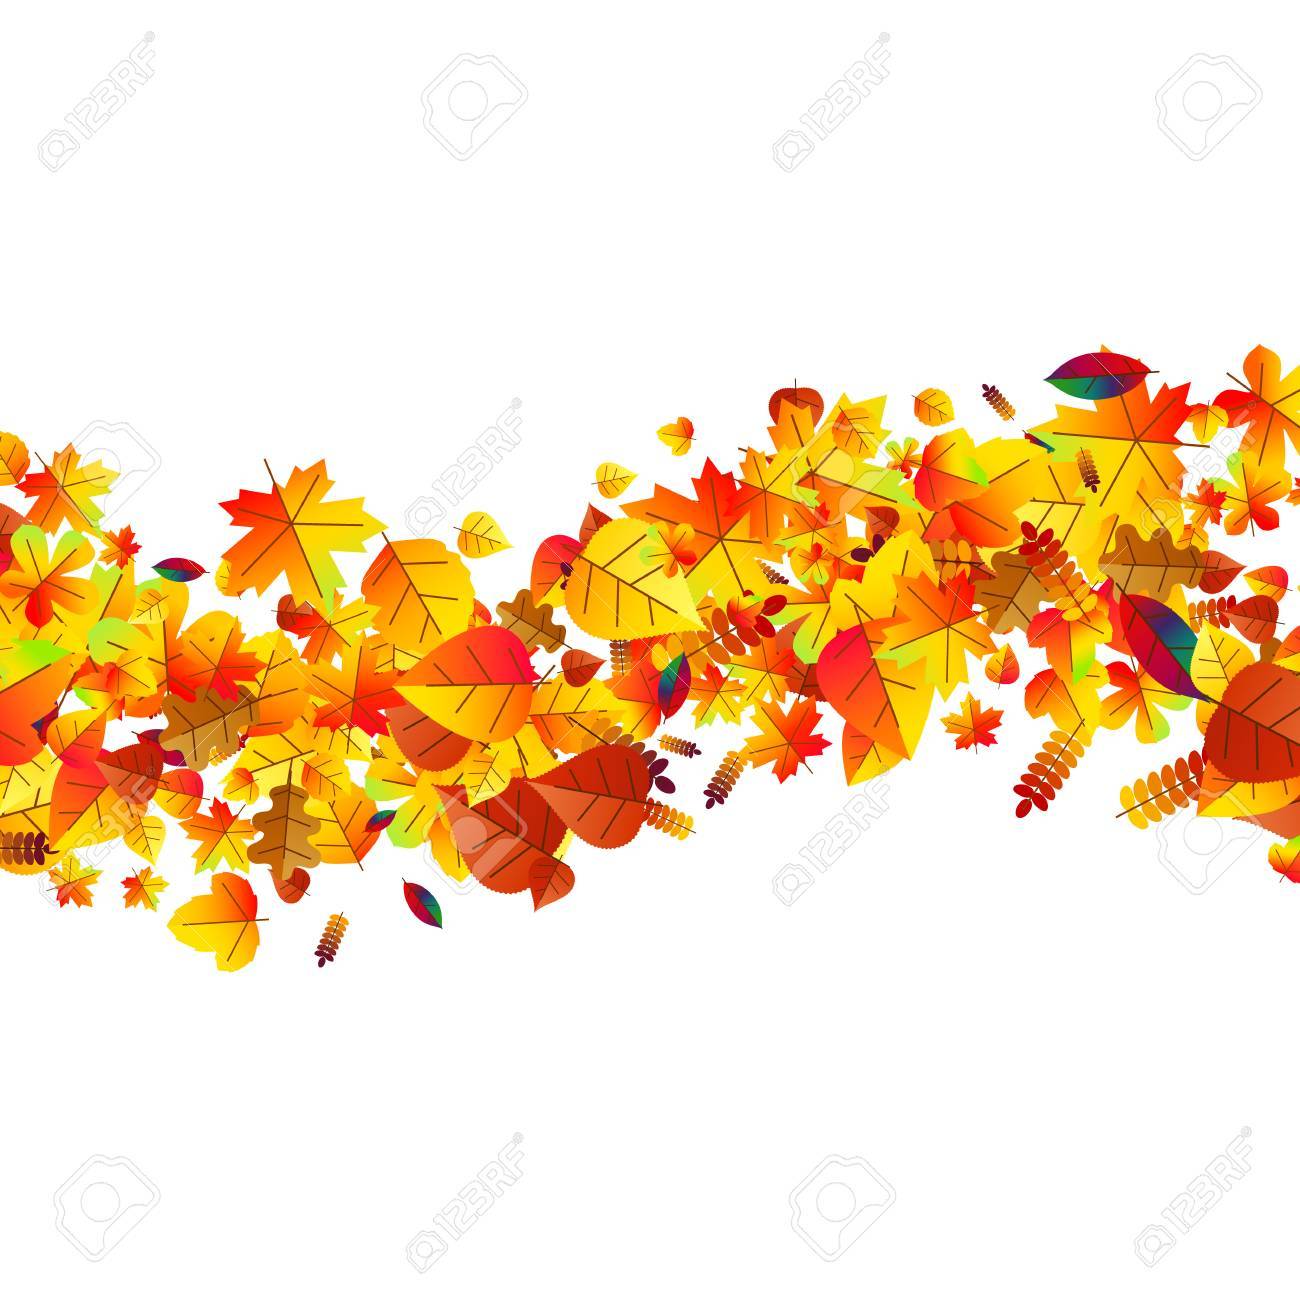 Autumn Leaves Scattered Background With Oak Maple And Rowan